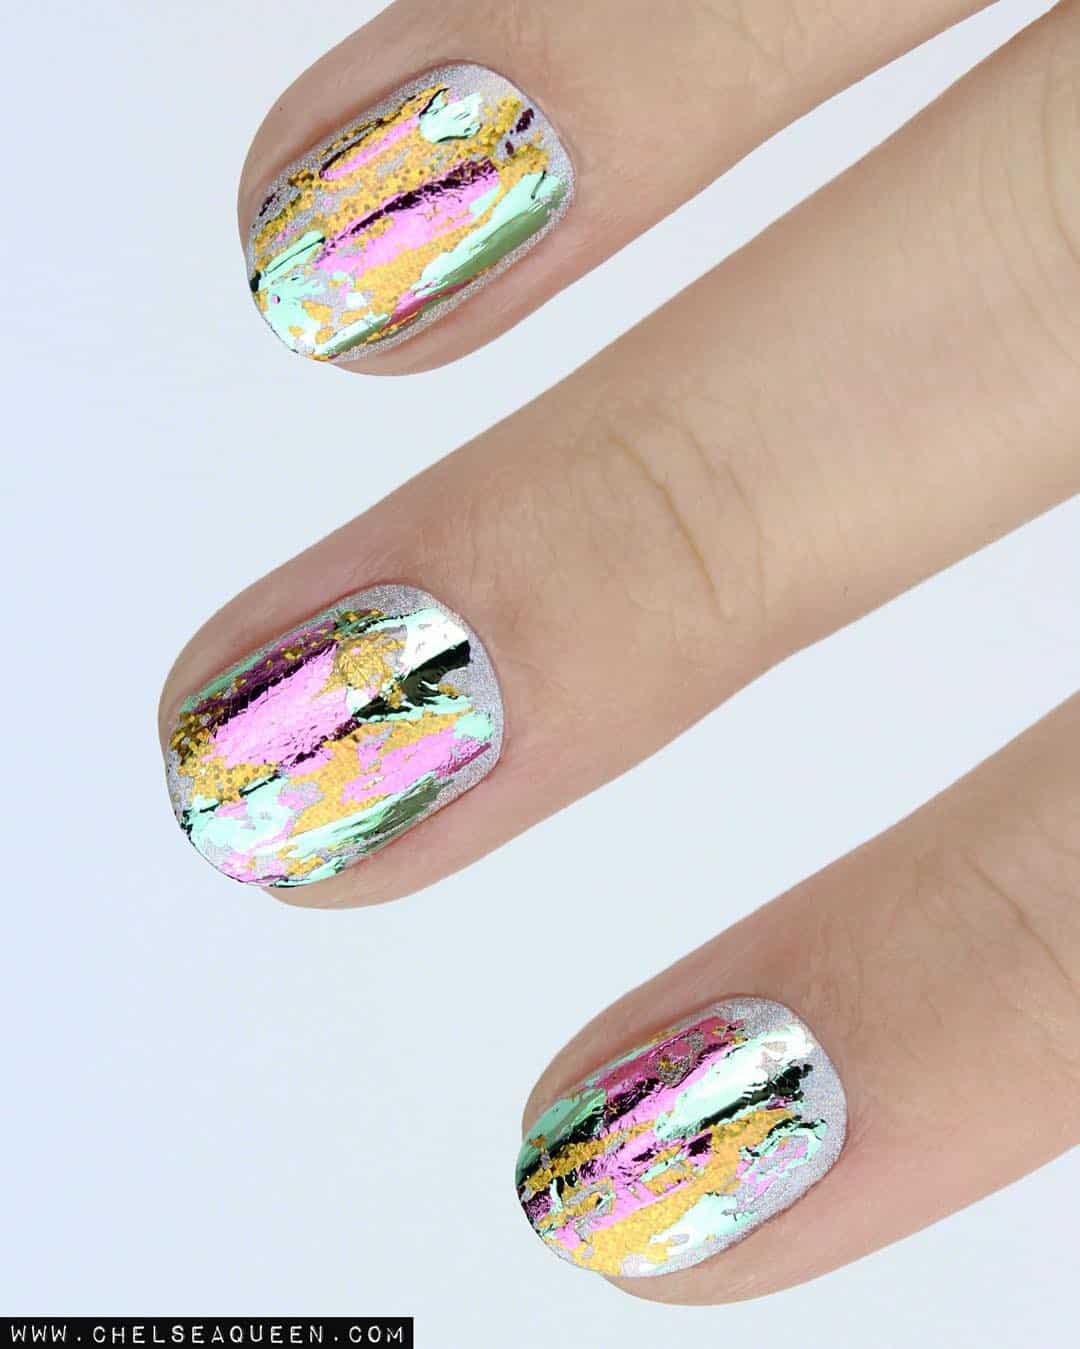 Most versatile nail design are round nails. It has many advantages and one of them is its durability. From foil to floral designs, you can choose from many designs. #naildesigns #nailart #round #nails